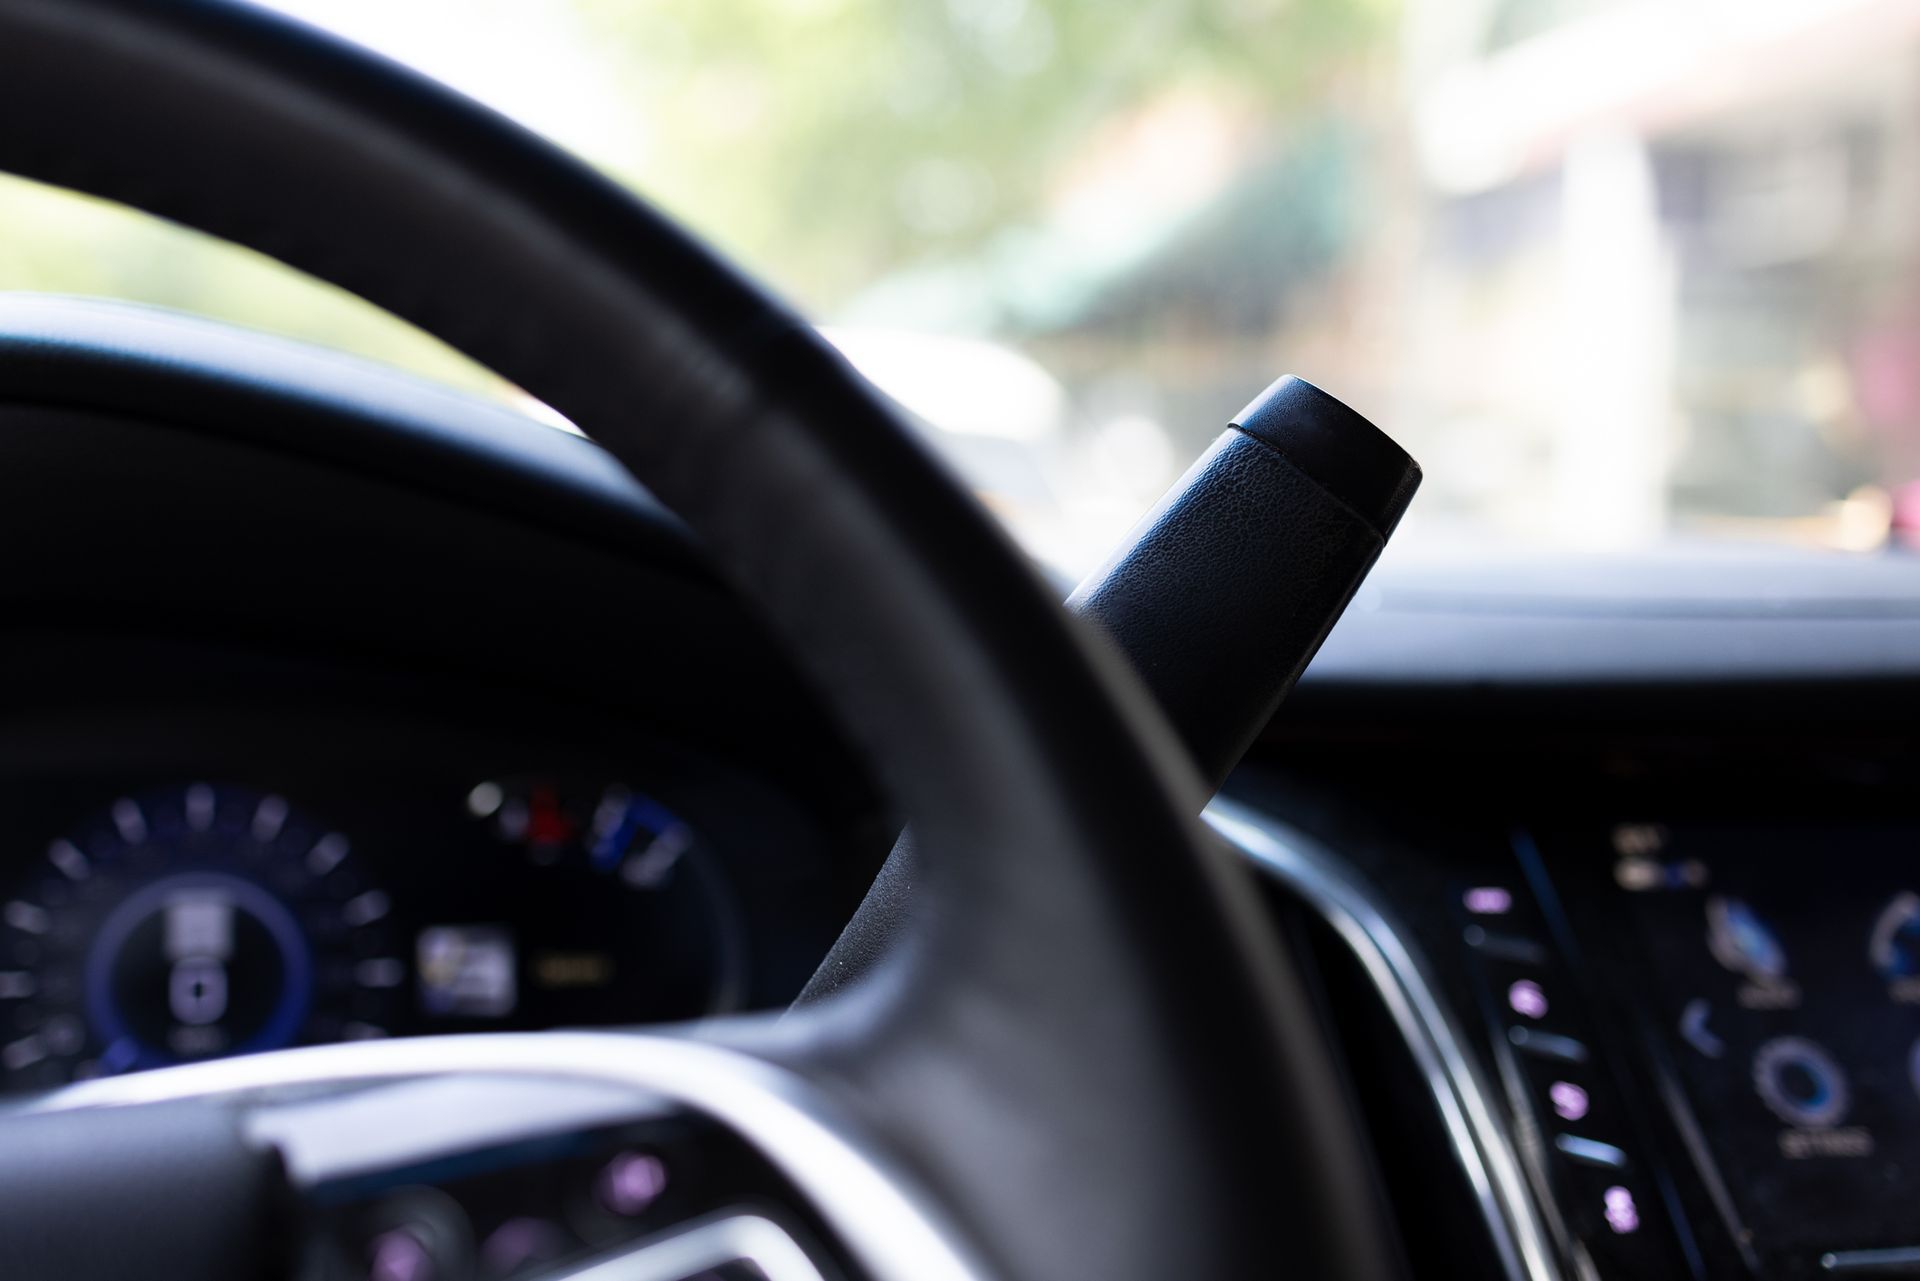 A close up of a car steering wheel and dashboard